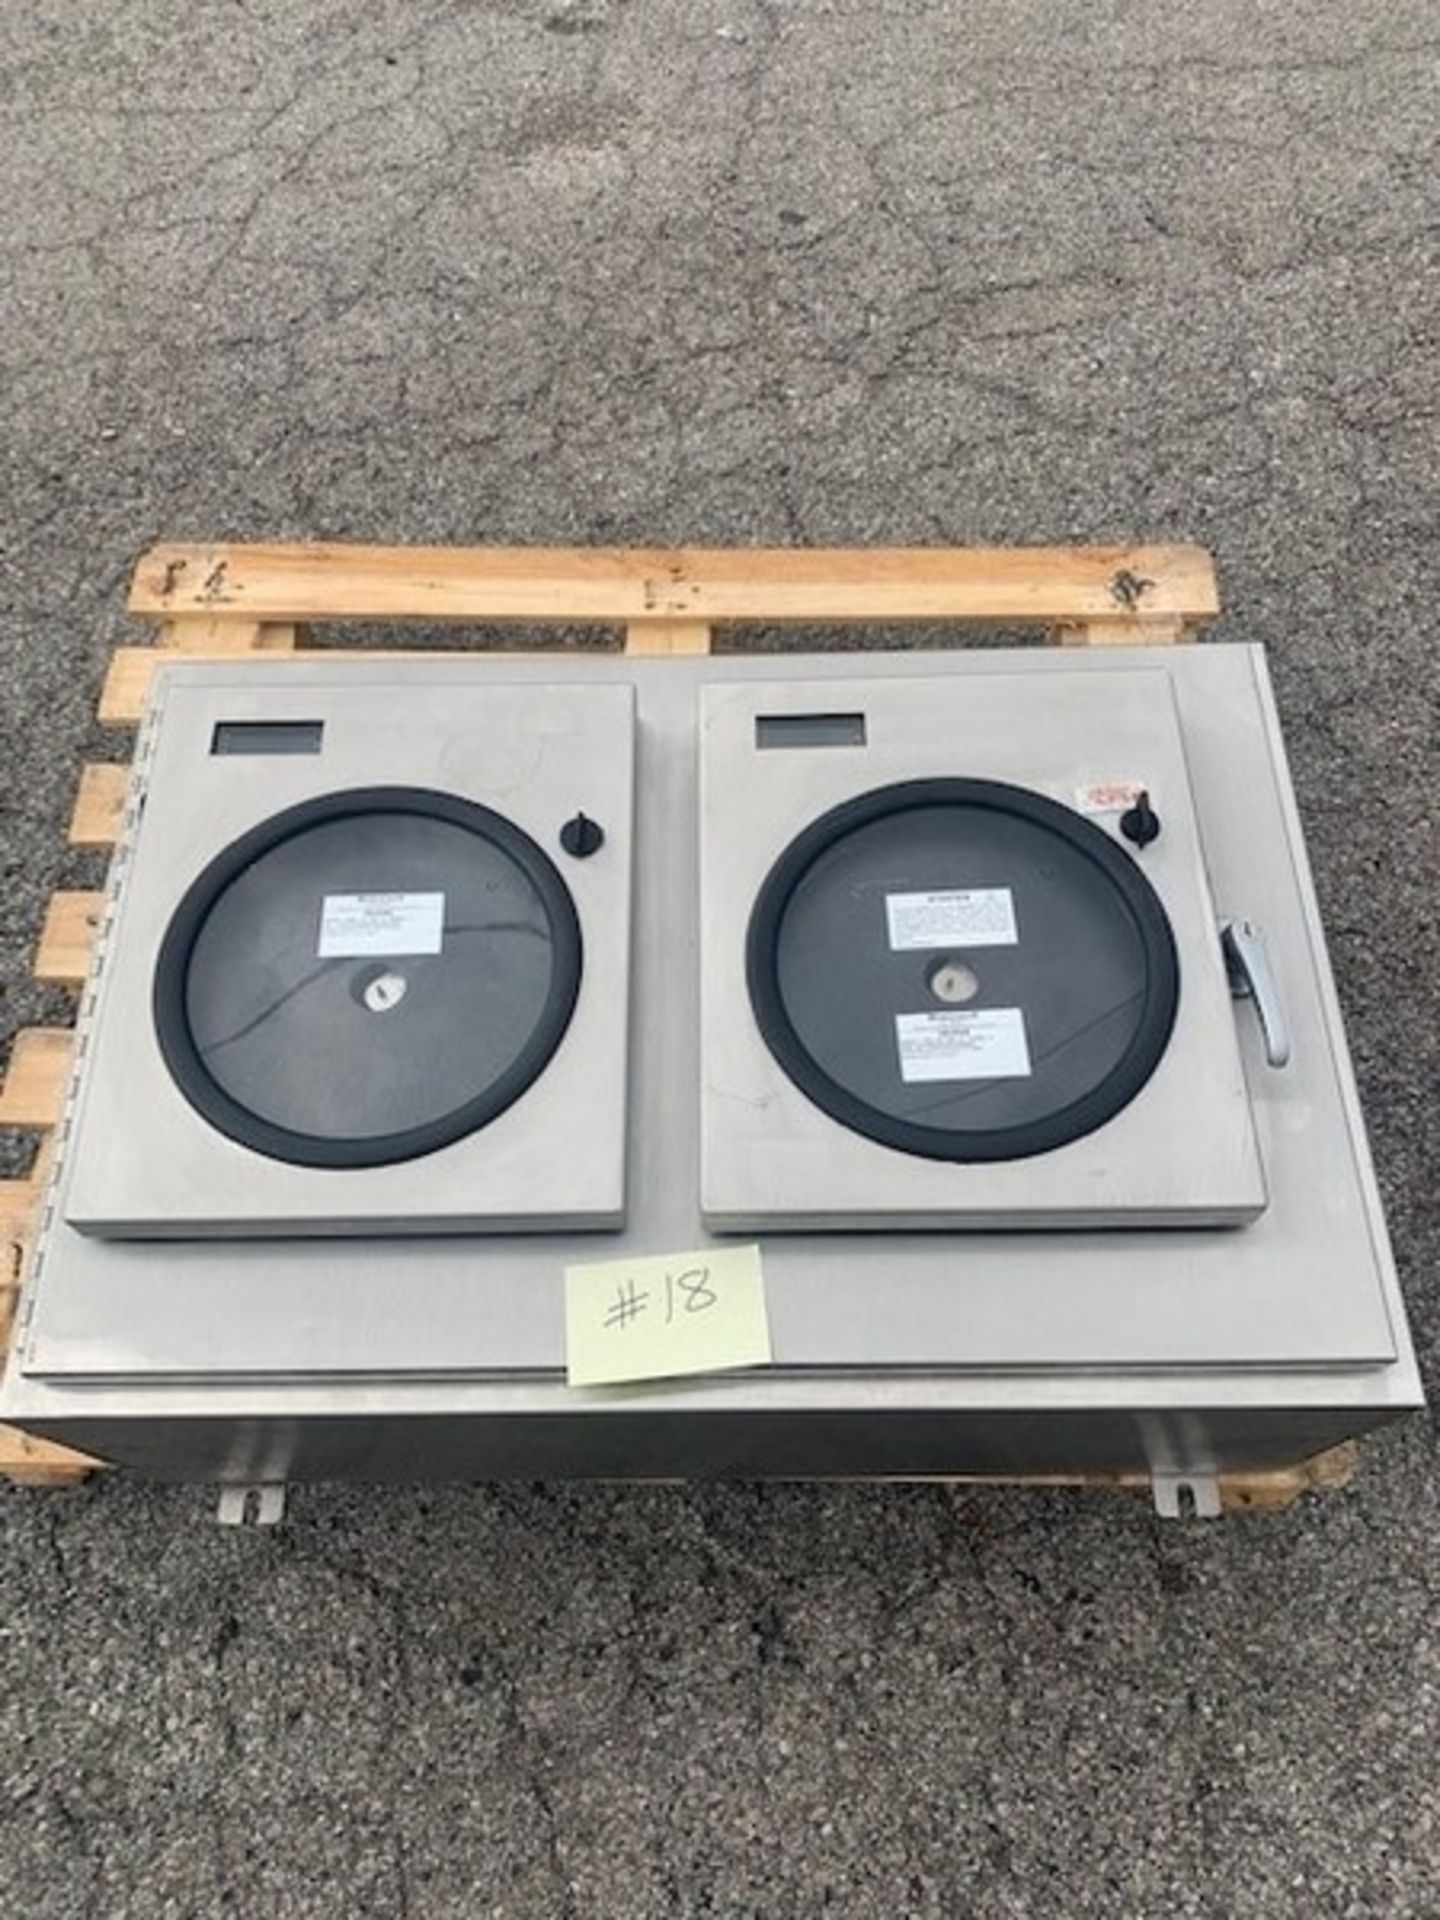 (2) Honeywell Chart Recorders Mounted in Stainless Enclosure, Model DR4500, S/N